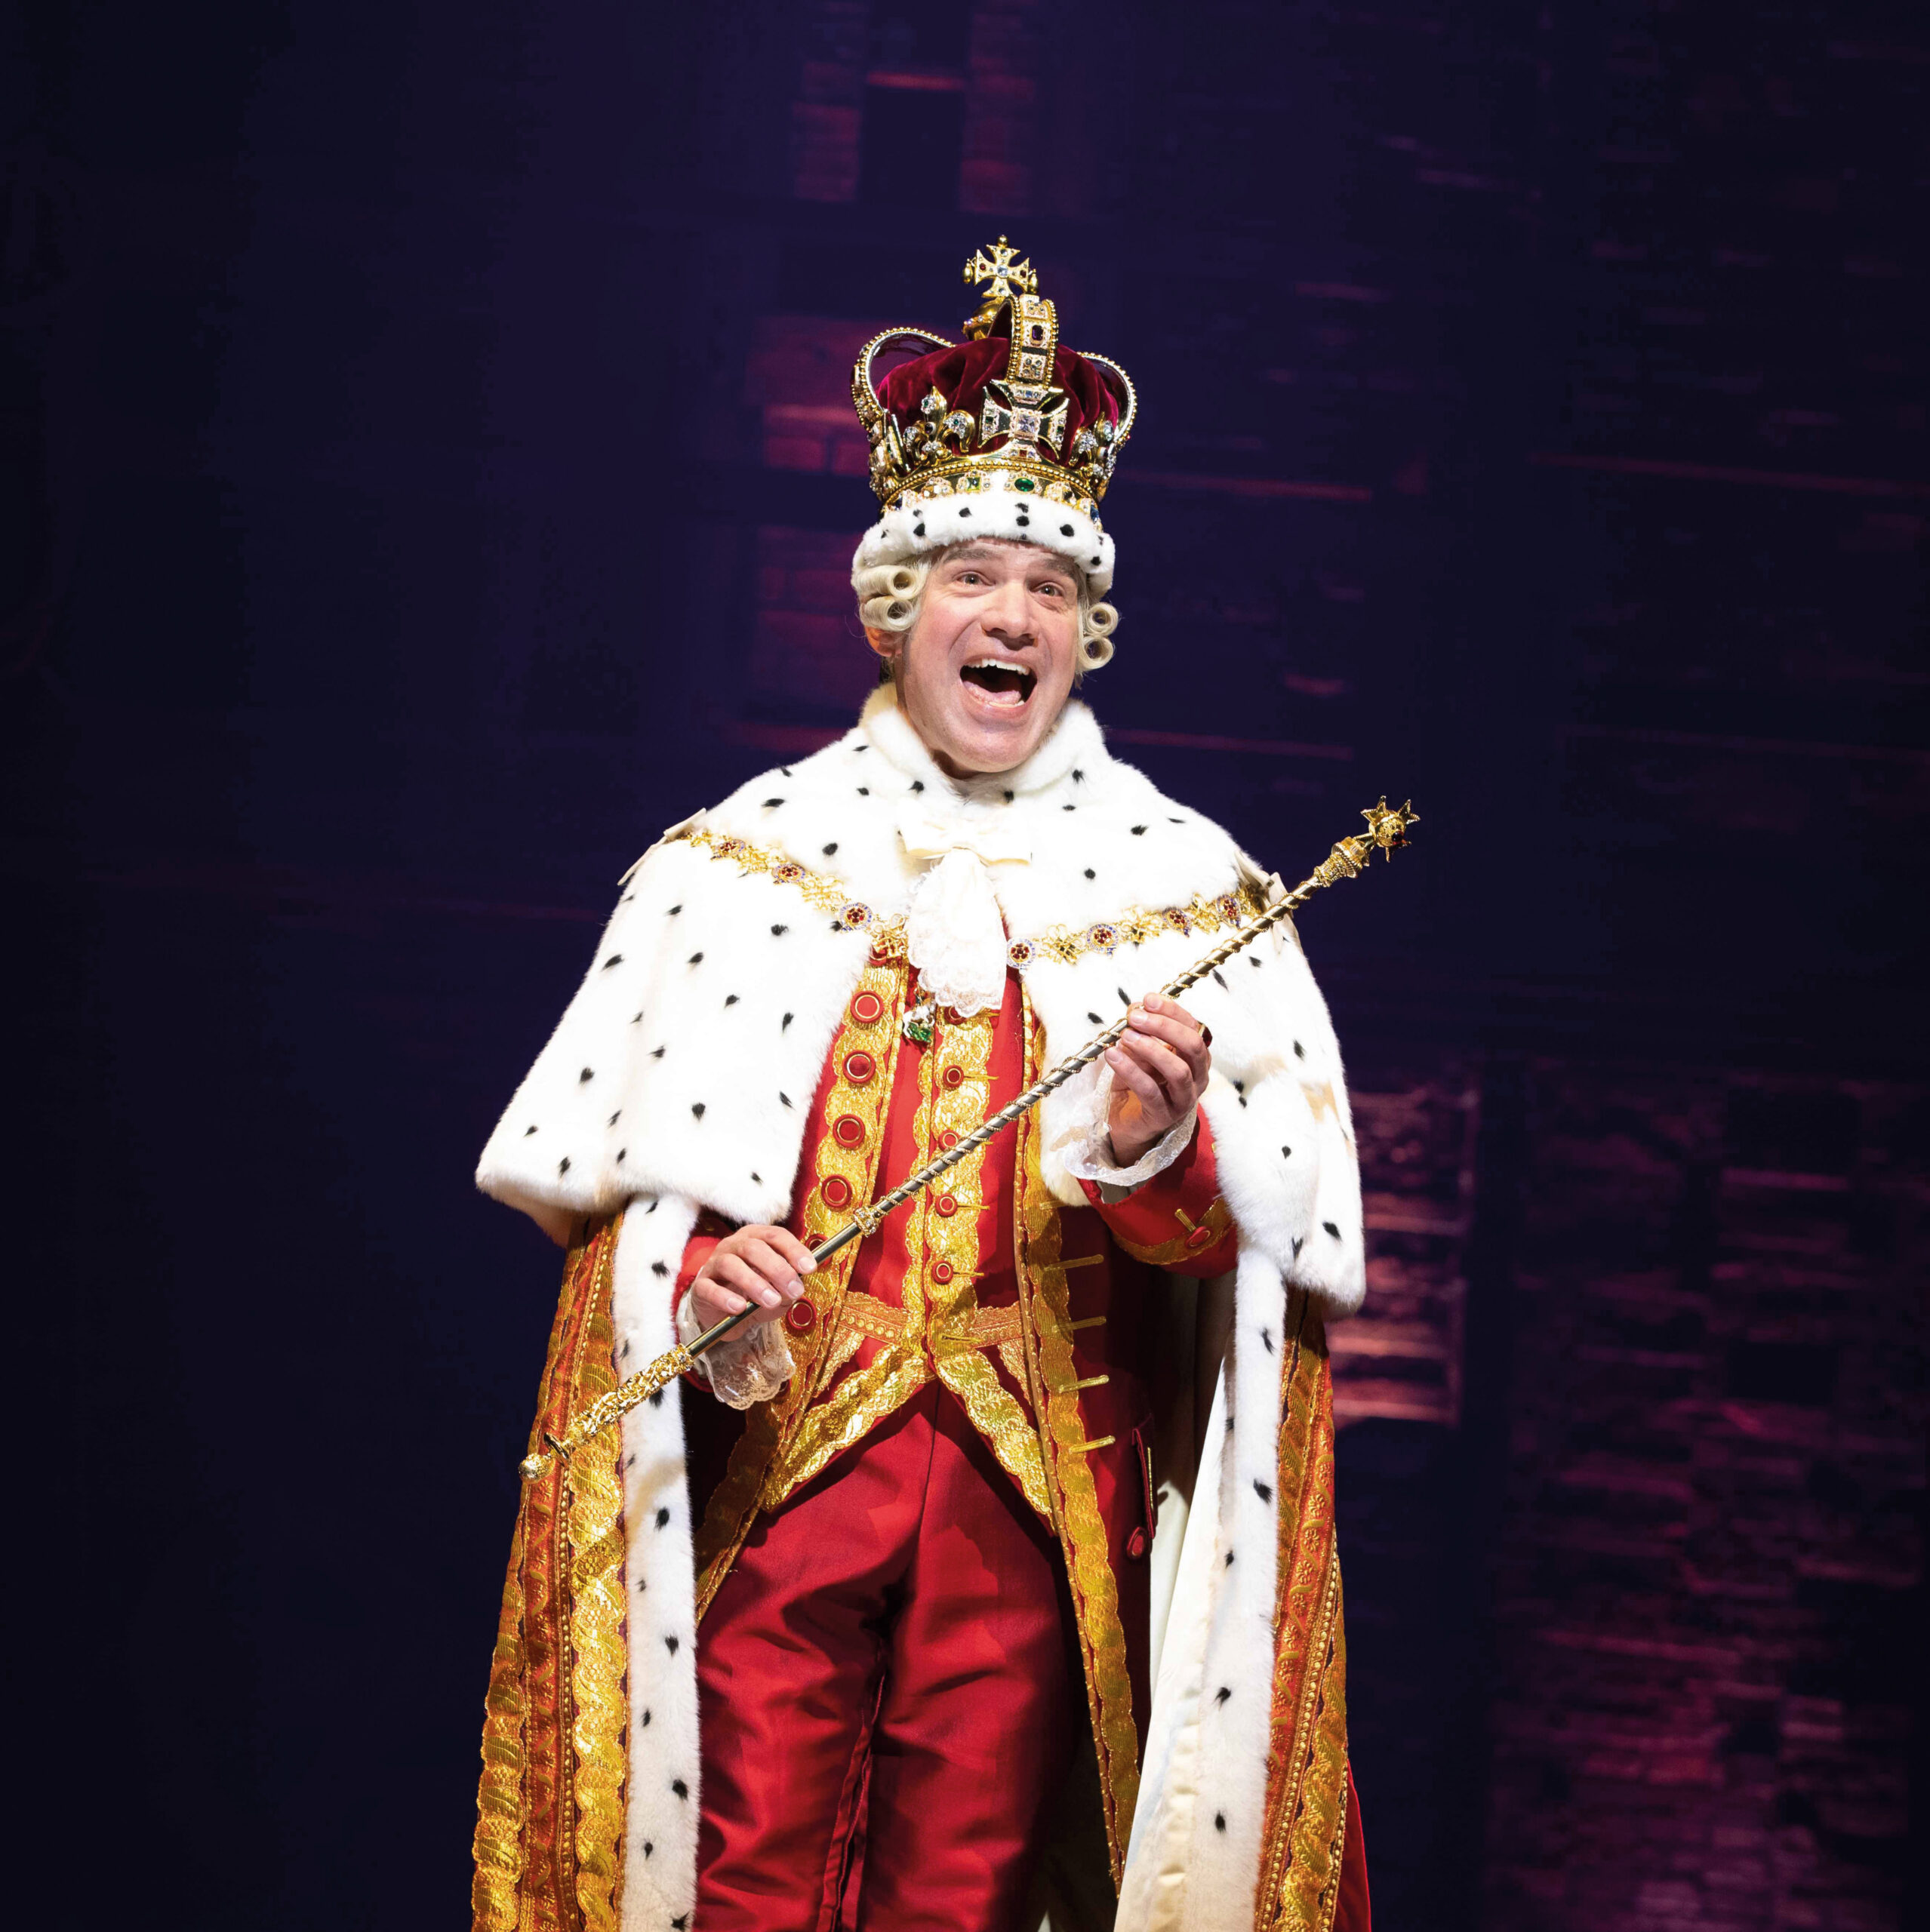 Daniel Boys as King George in Hamilton, which is in Manchester until 2024. Credit: Danny Kaan